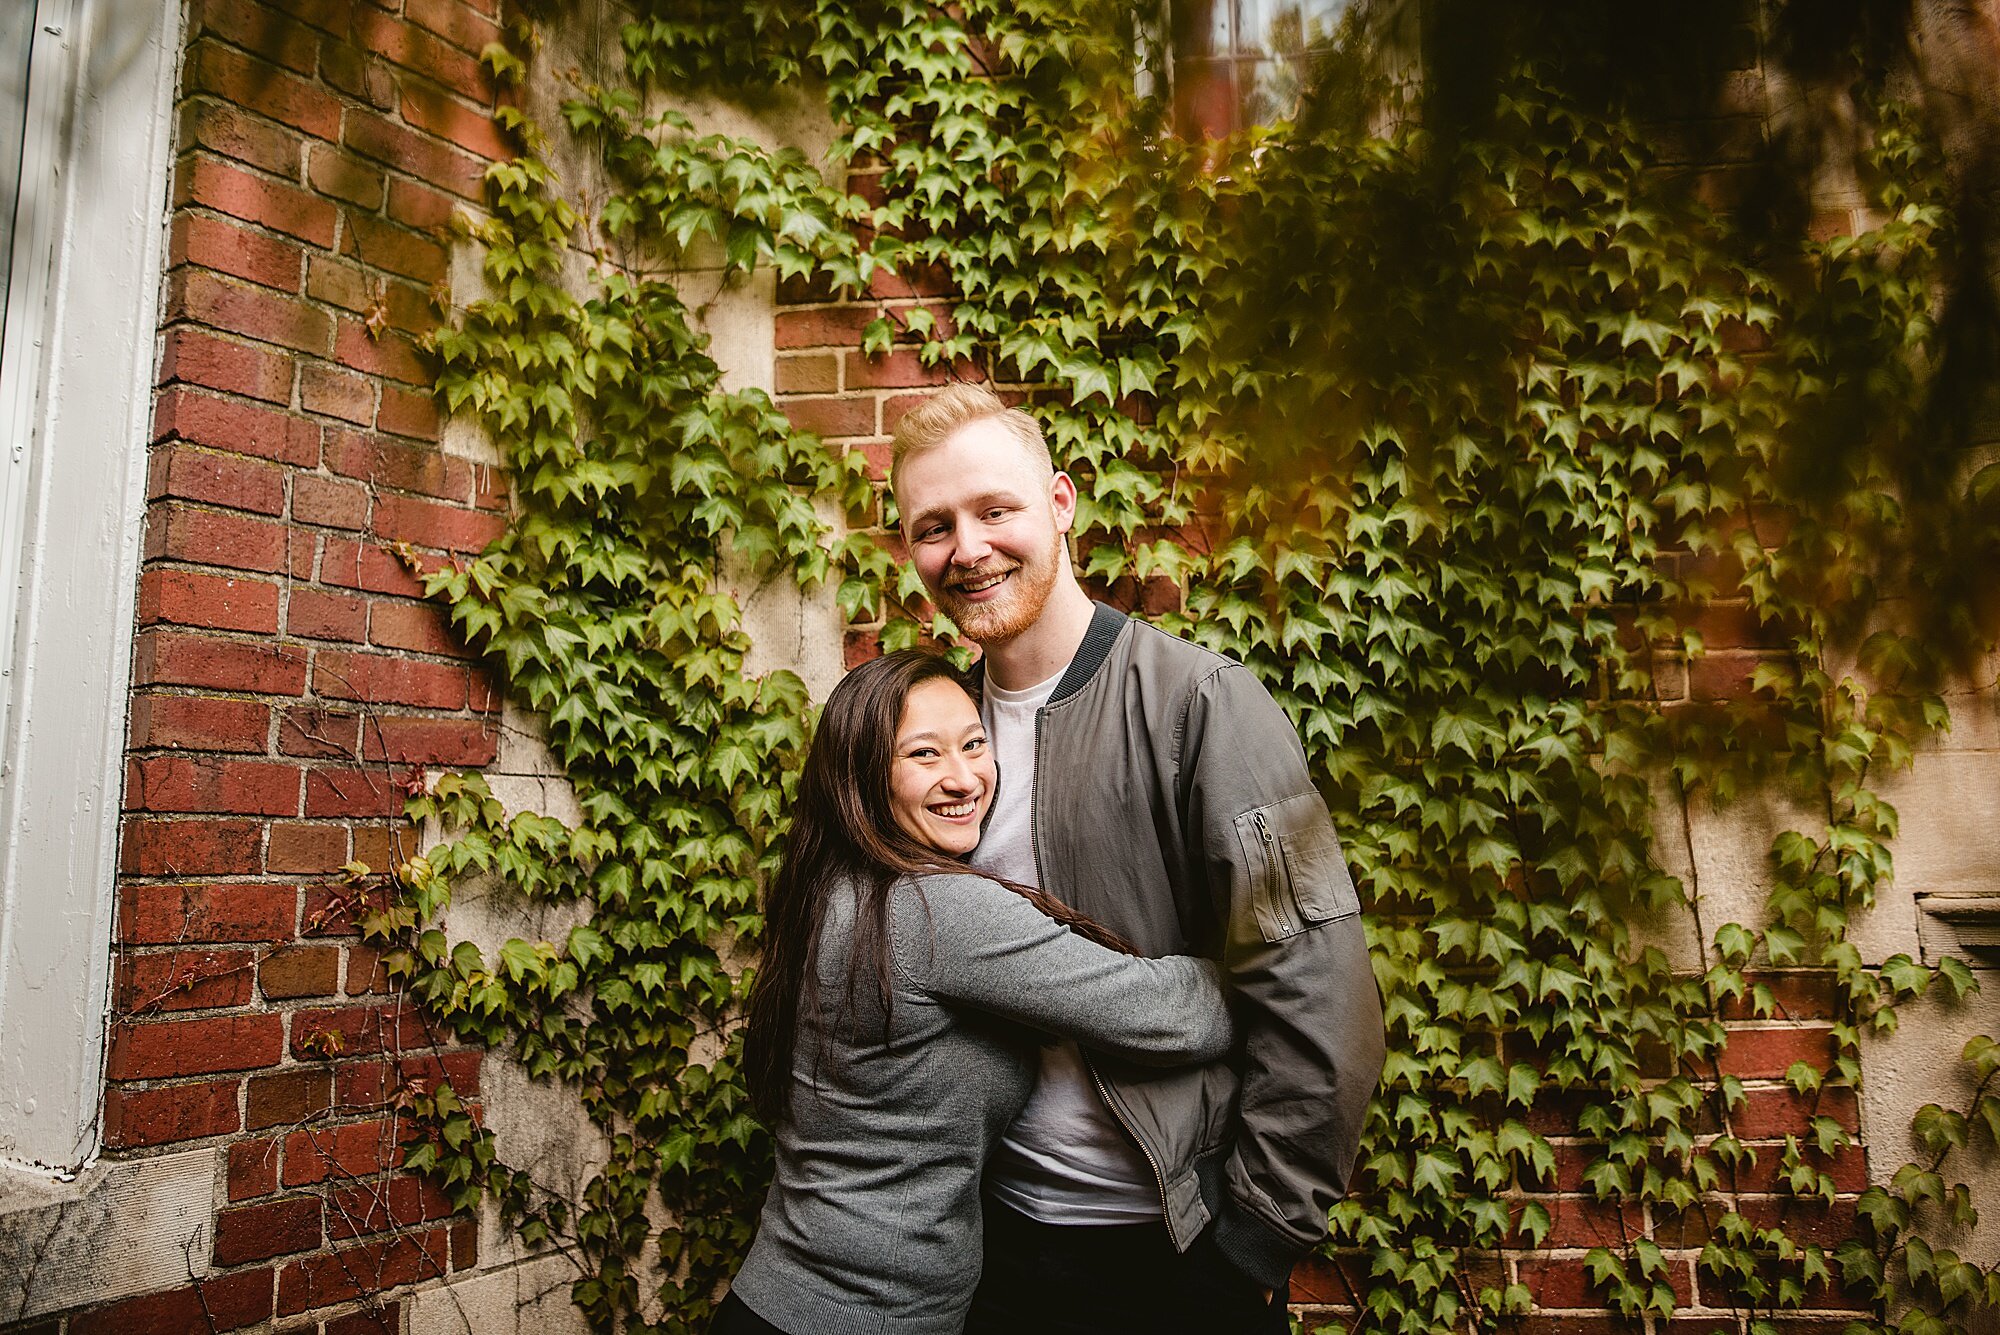 Downtown Grand Rapids Michigan Engagement Pictures - 11.jpg